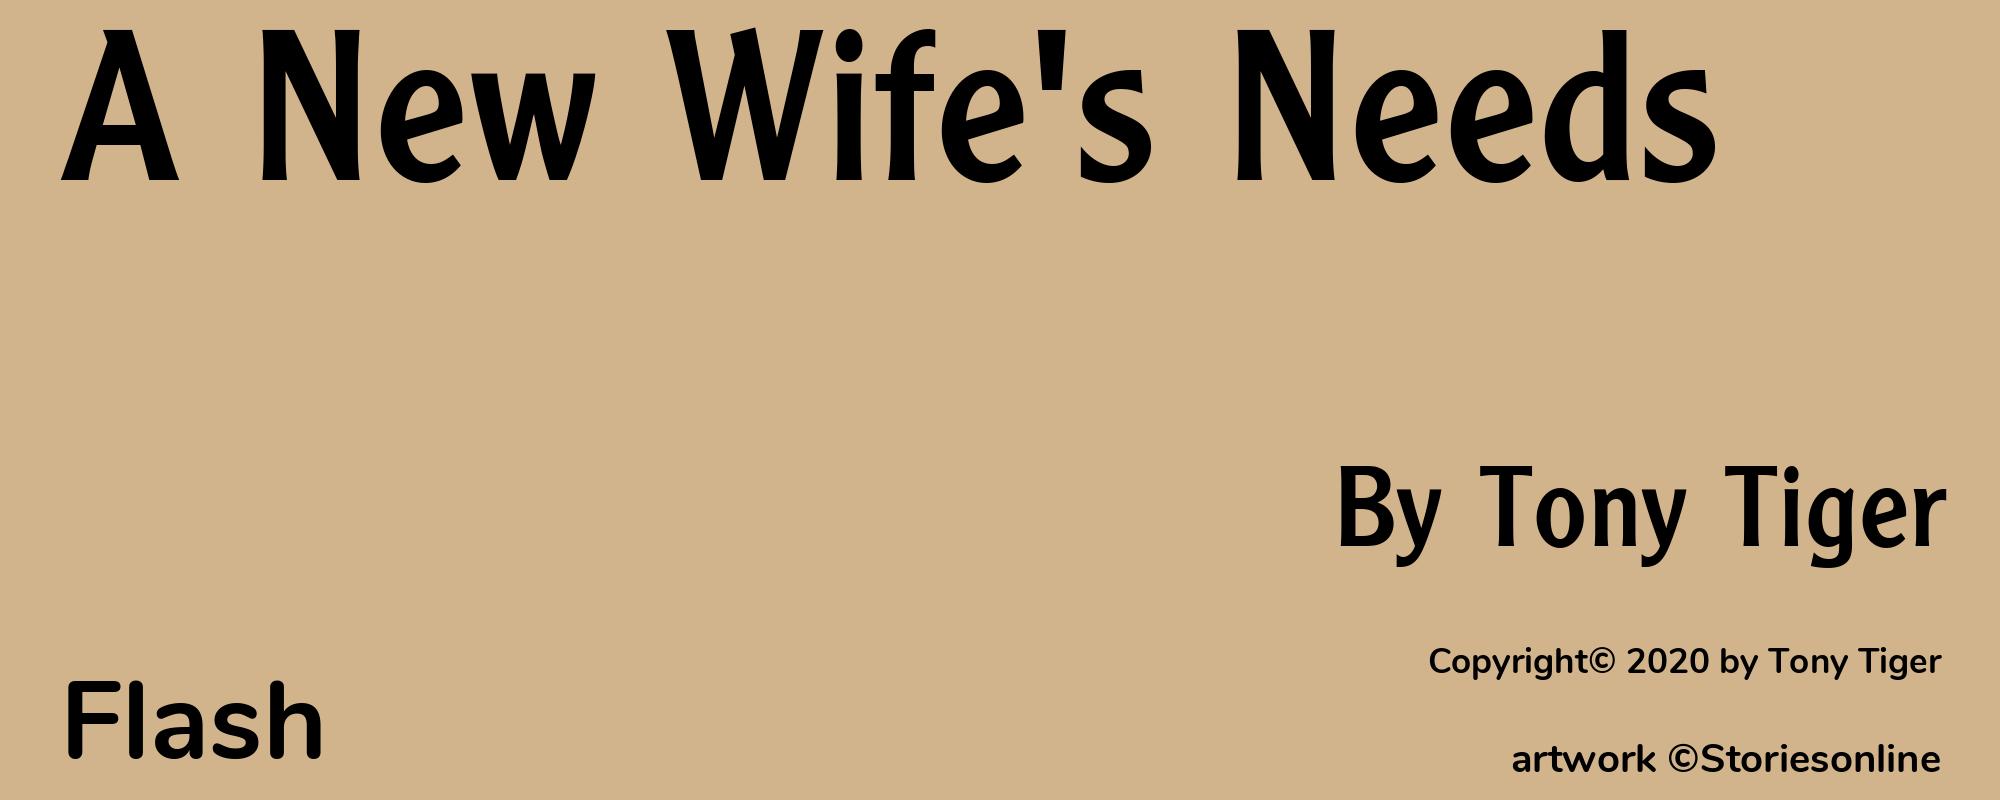 A New Wife's Needs - Cover